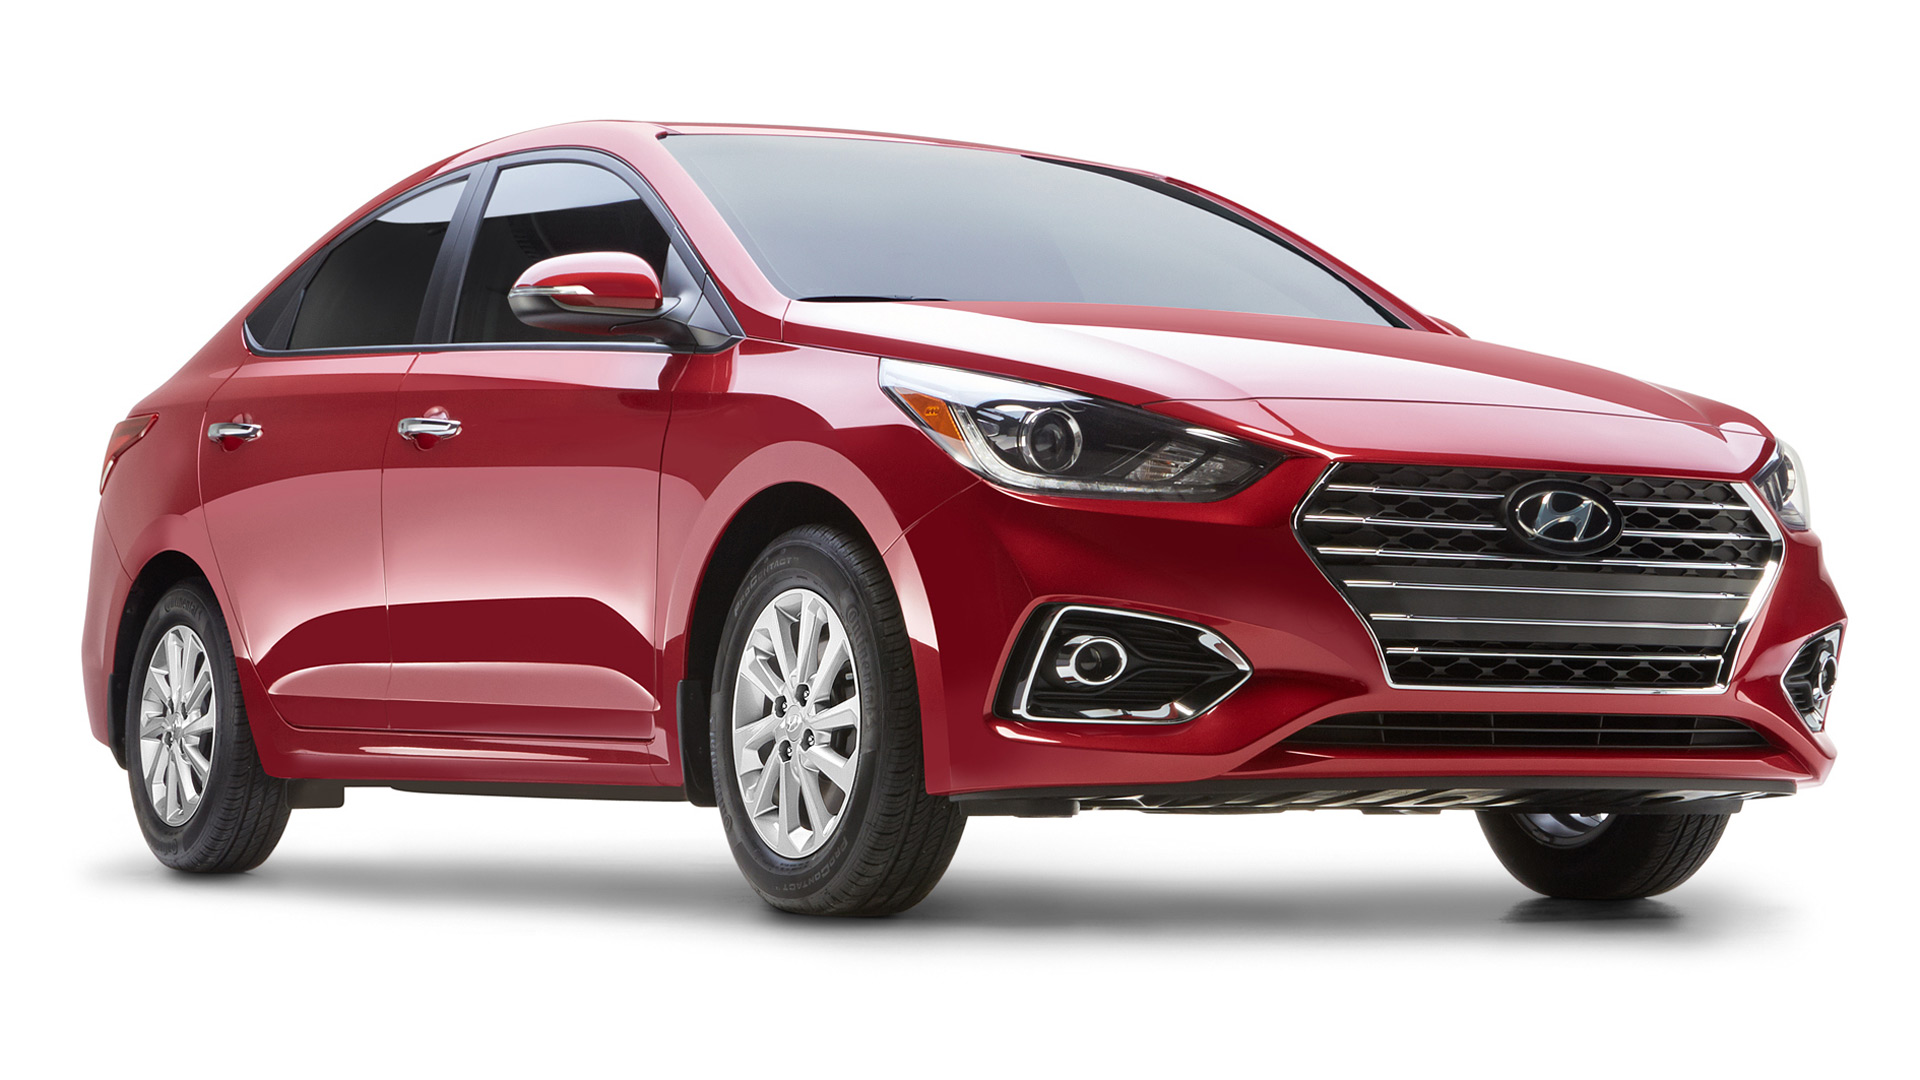 2018 Hyundai Accent confirmed for U.S. as well as Canada (update)